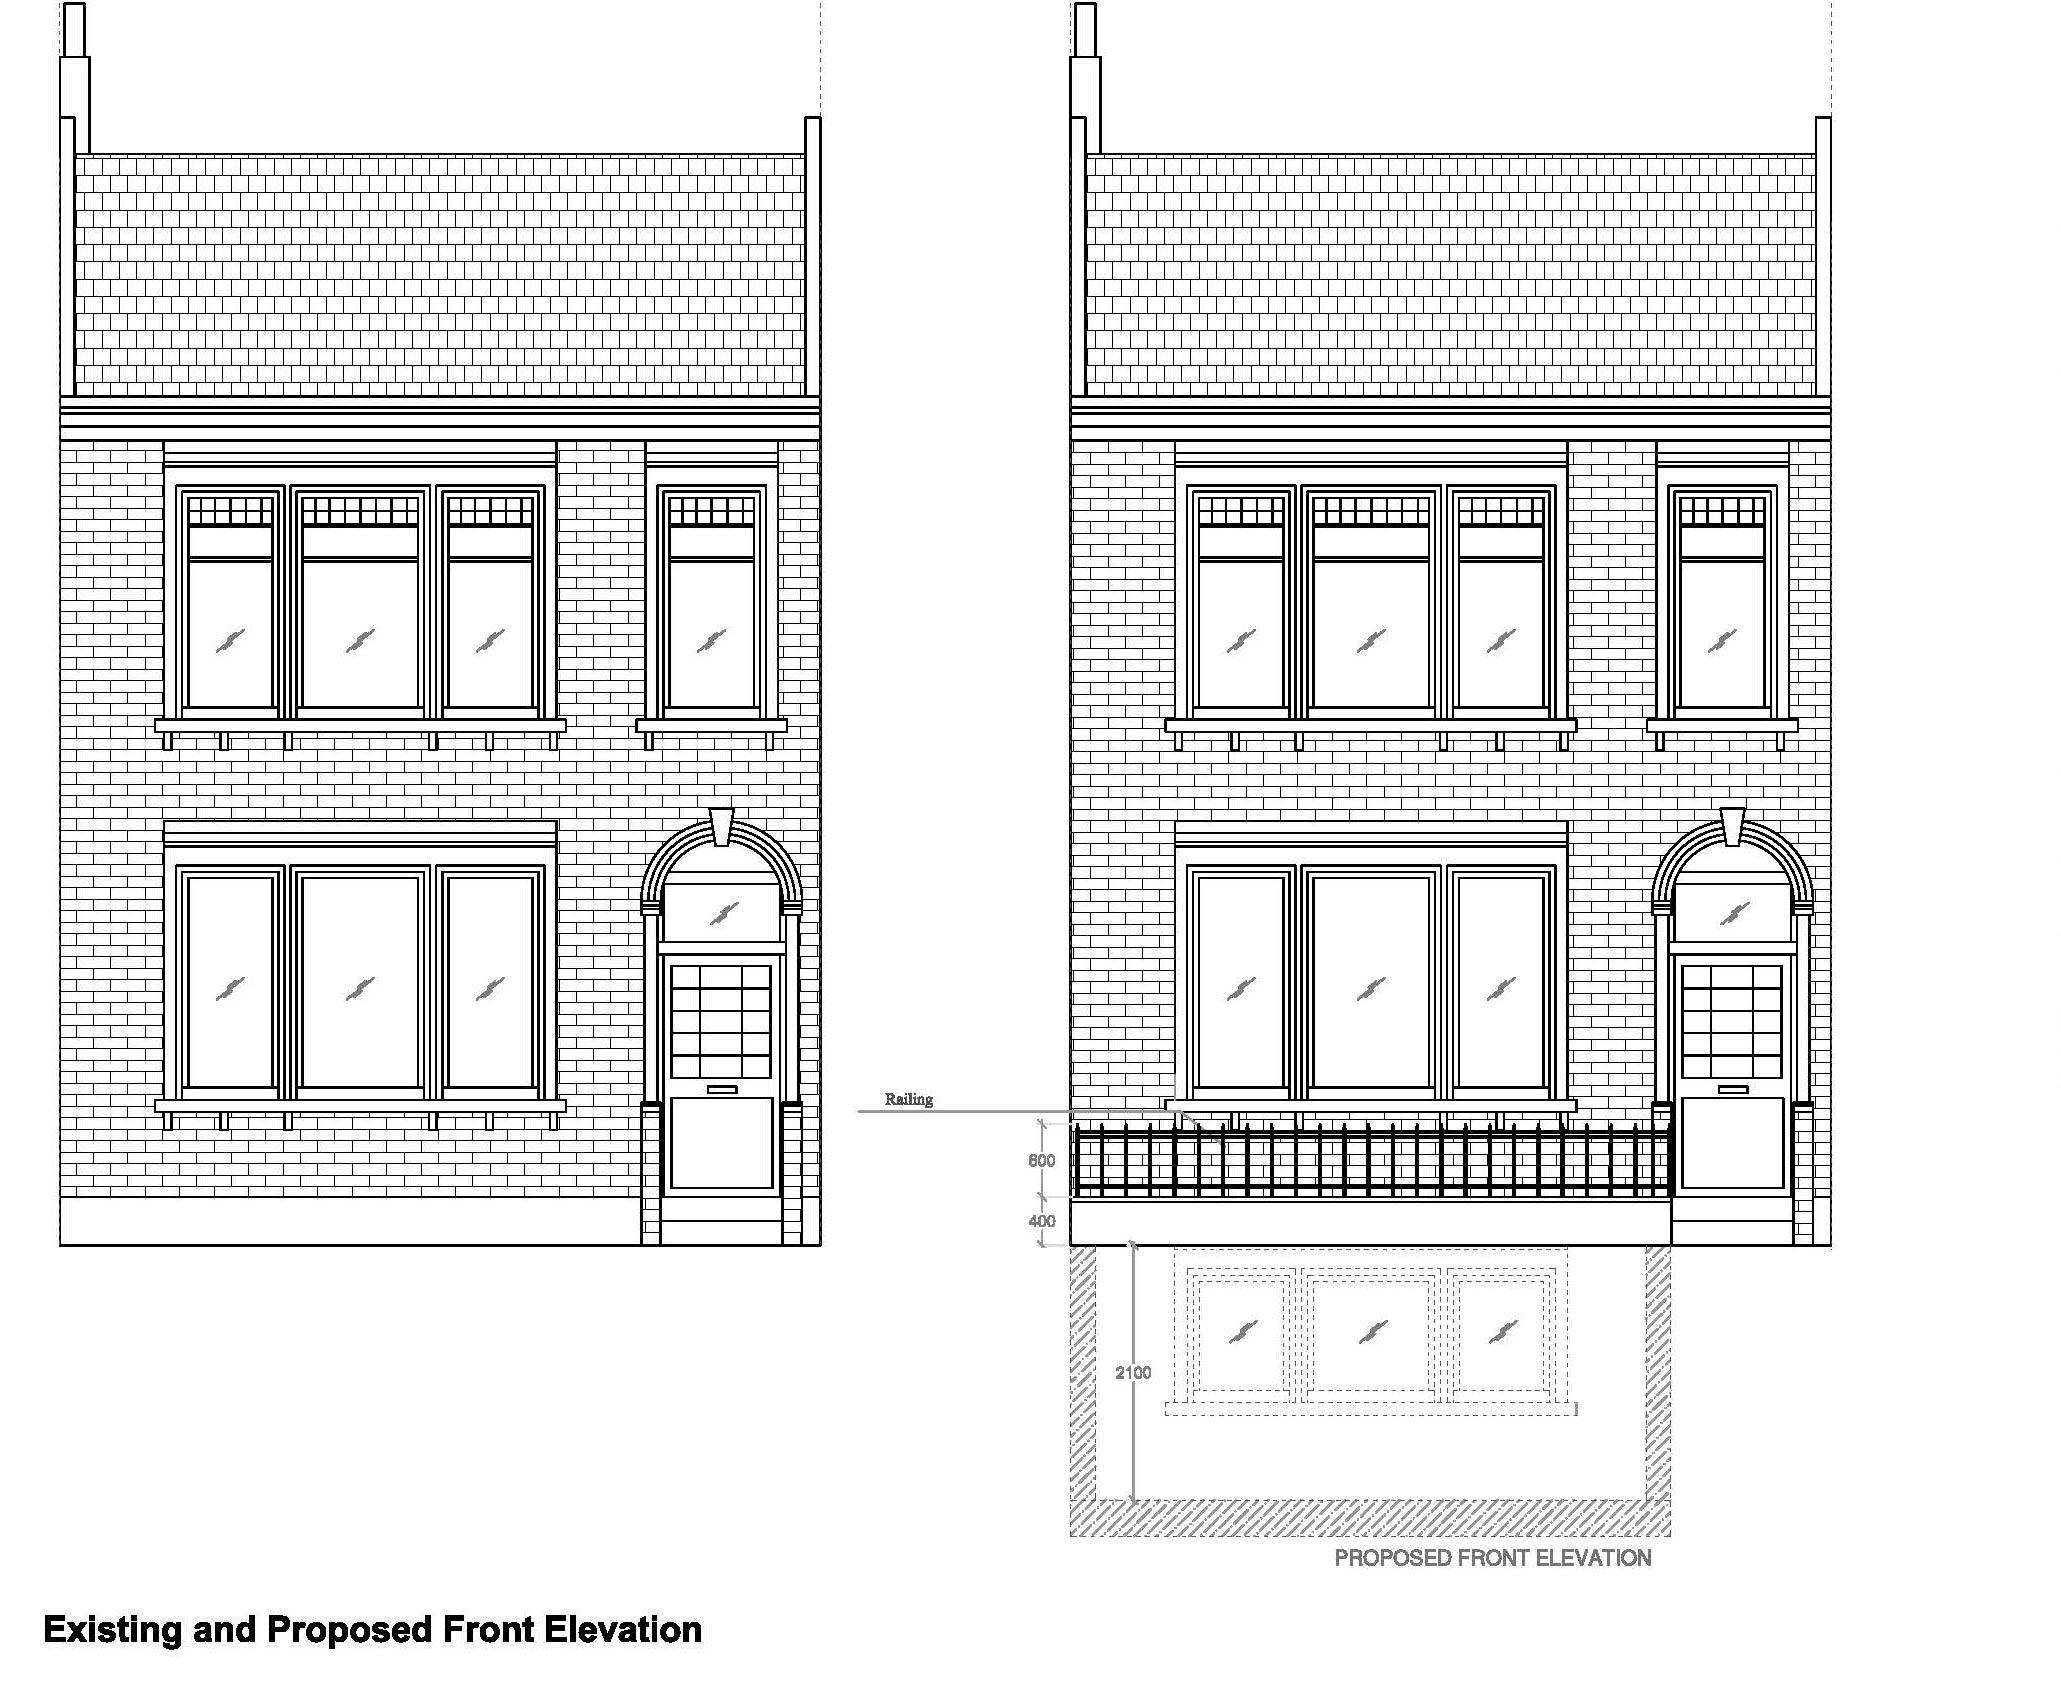 Wandsworth-council-front-elevation-3